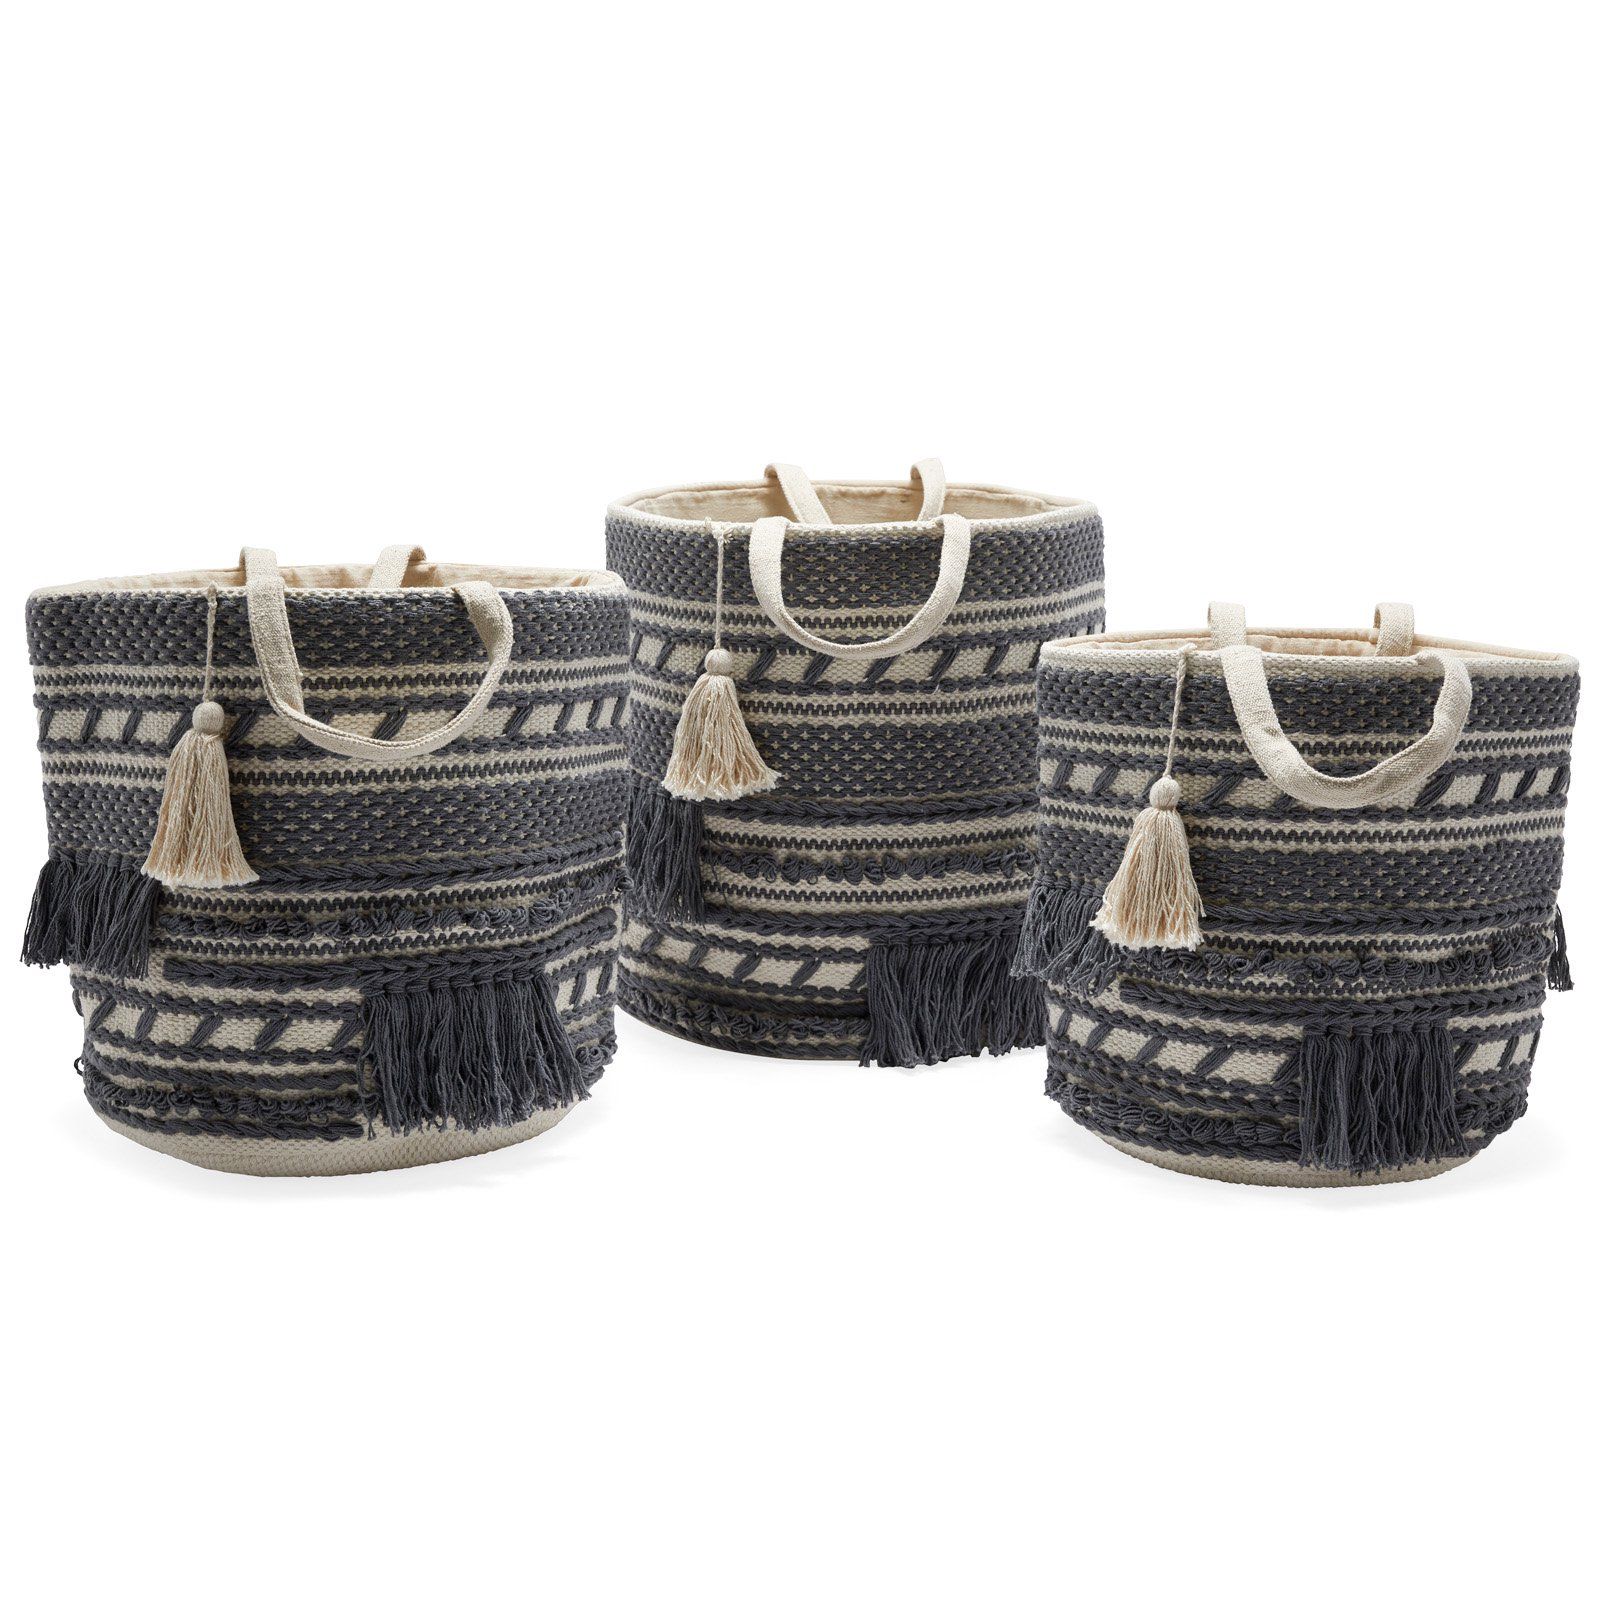 Hand Woven Macrame 3 Piece Basket Set, Natural and Charcoal by Drew Barrymore Flower Home | Walmart (US)